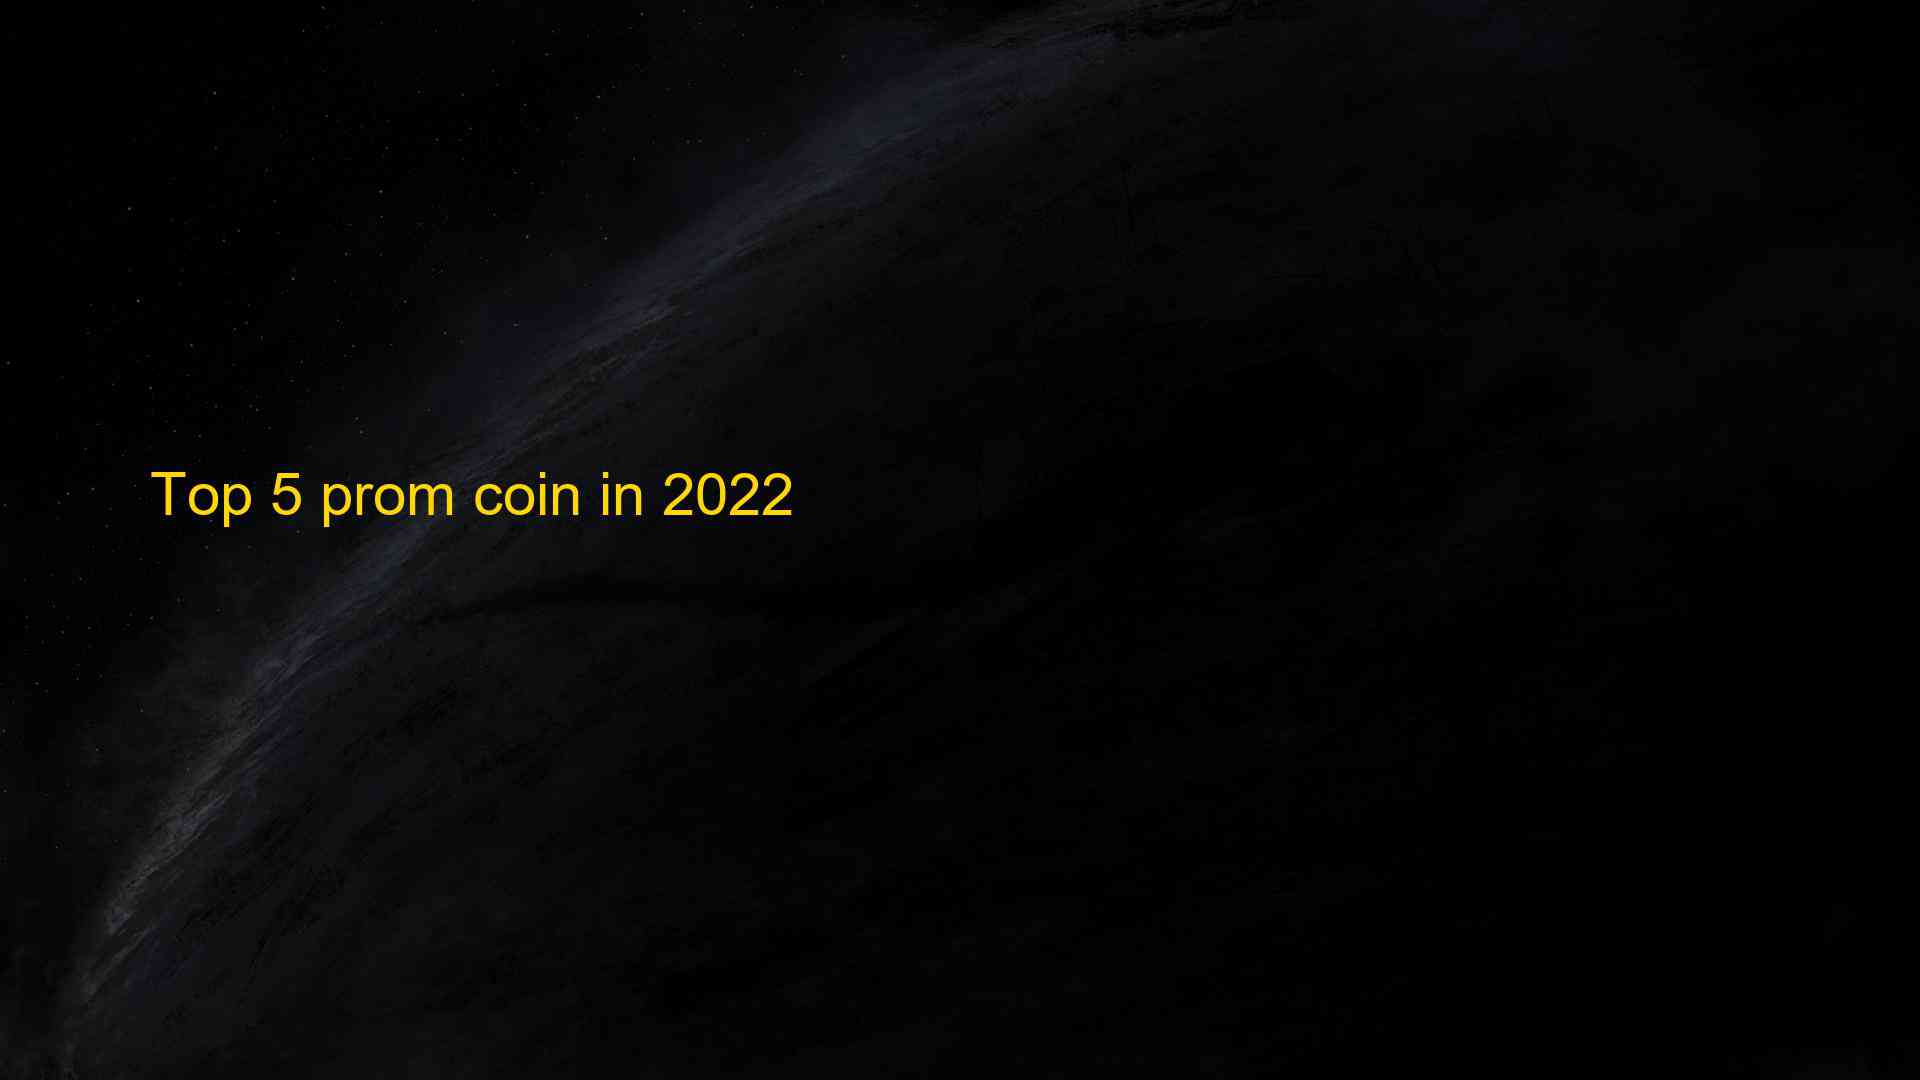 Top 5 prom coin in 2022 1659566484